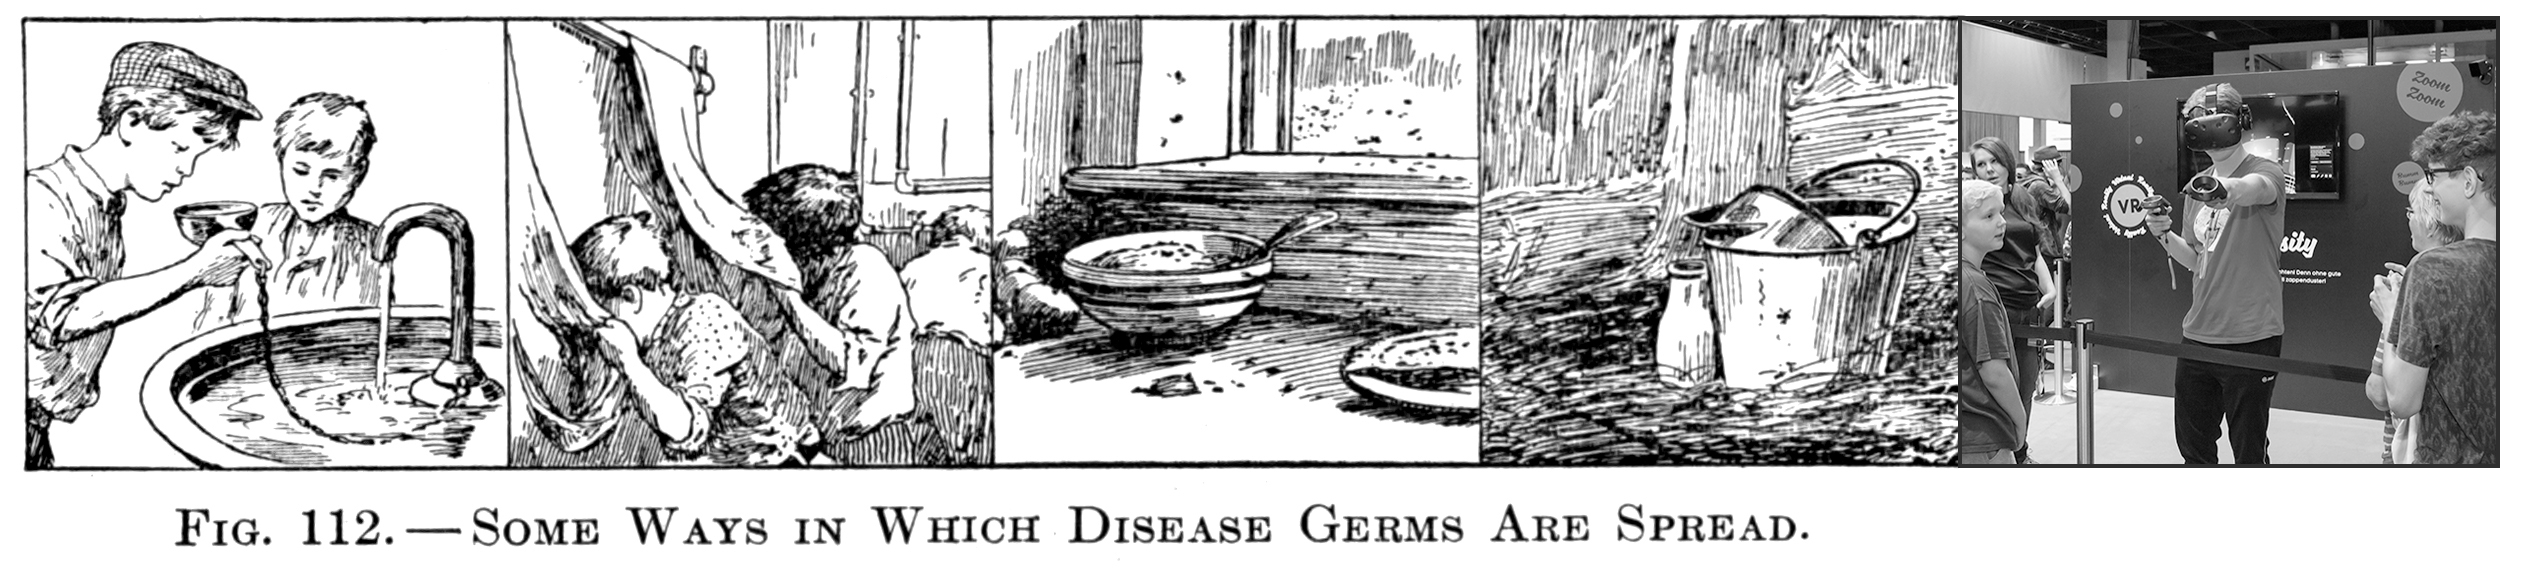 some ways in which disease germs are spread VR headsets